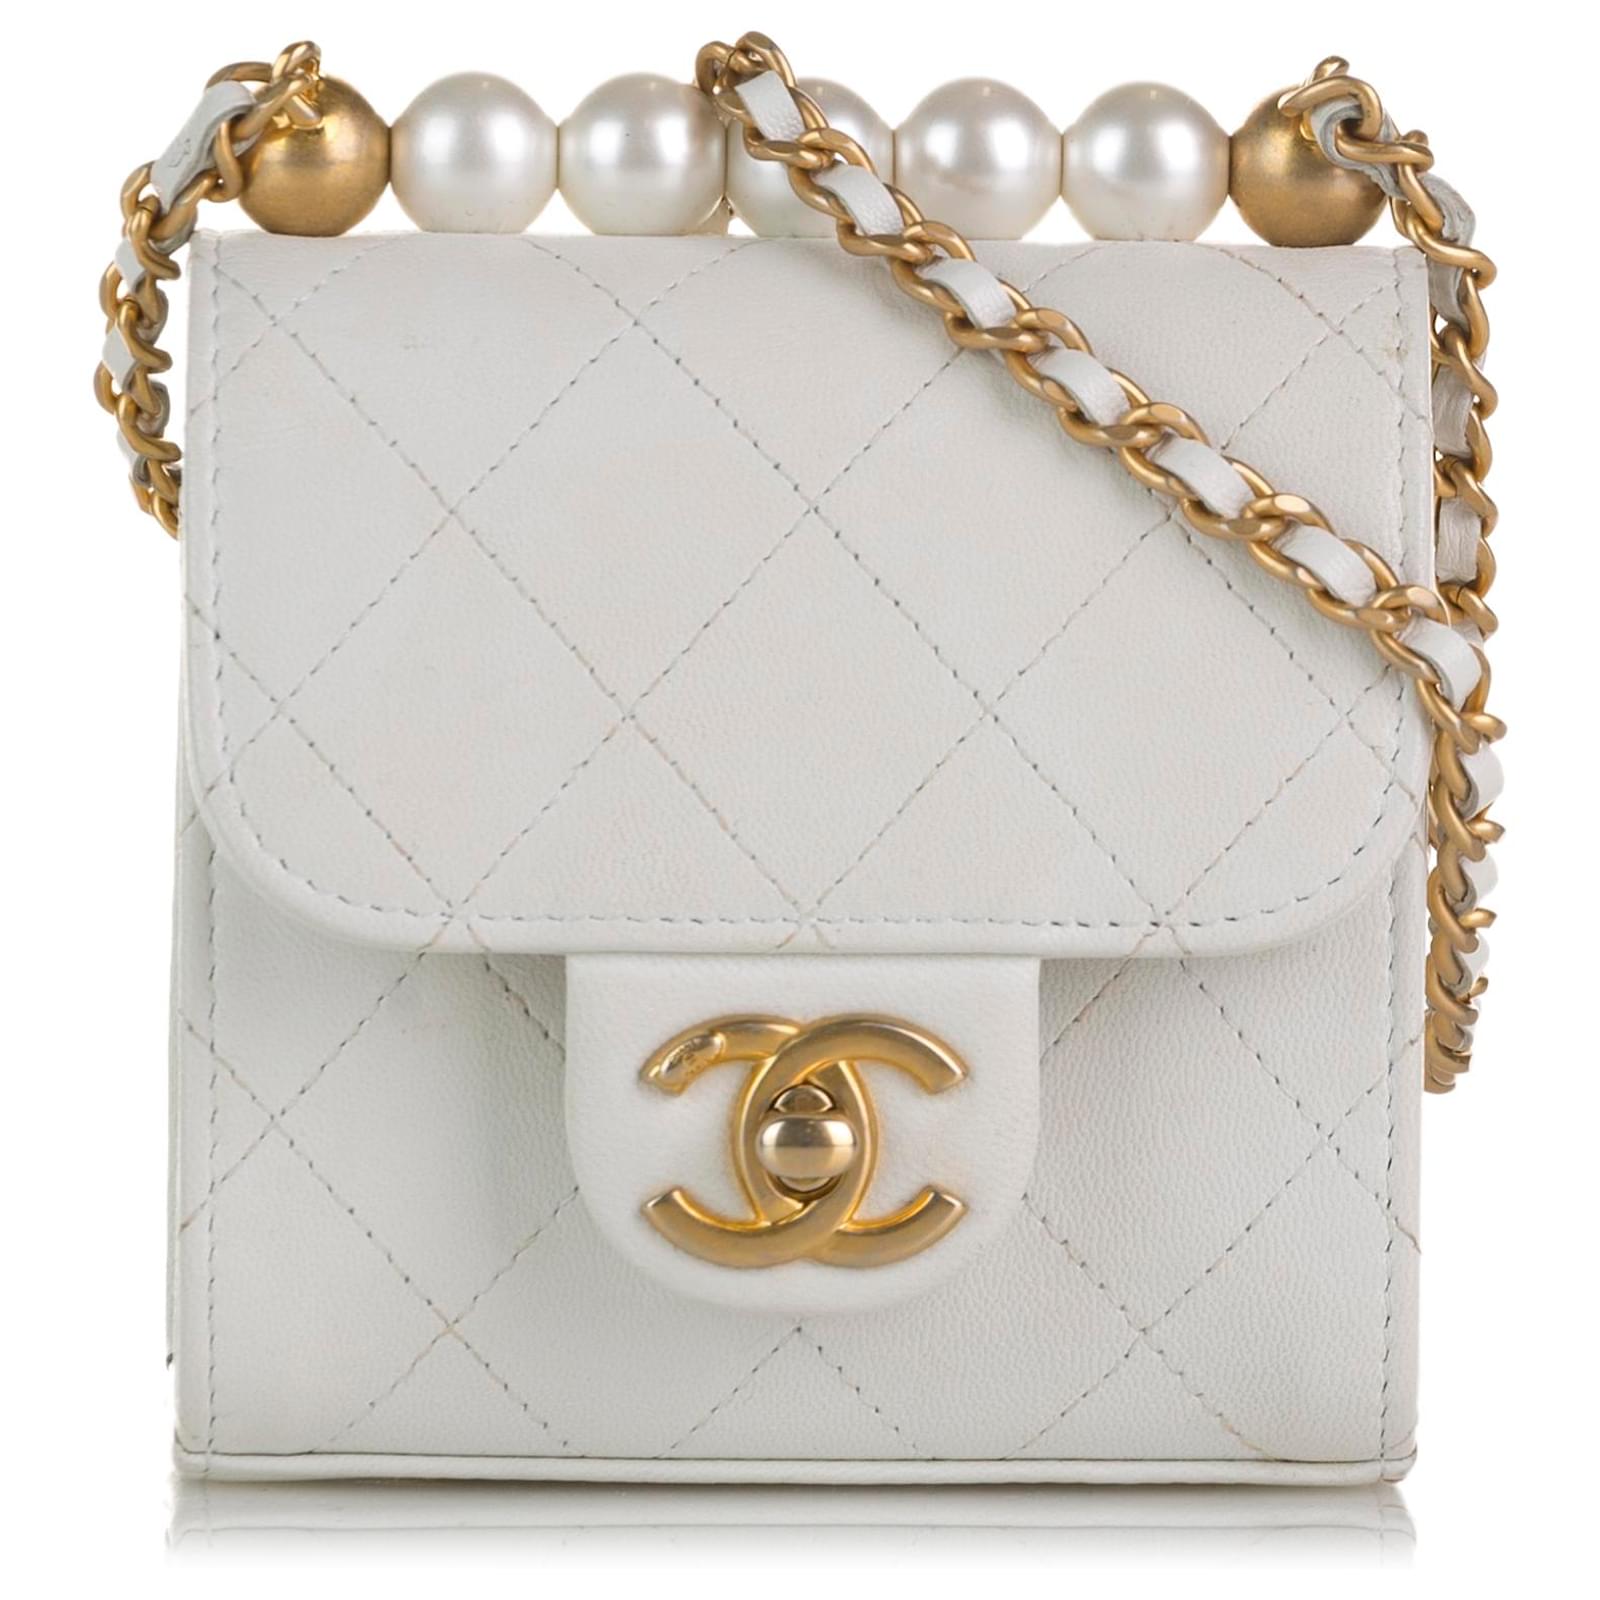 Chanel Small Goatskin Quilted Chic Pearls Flap Bag 